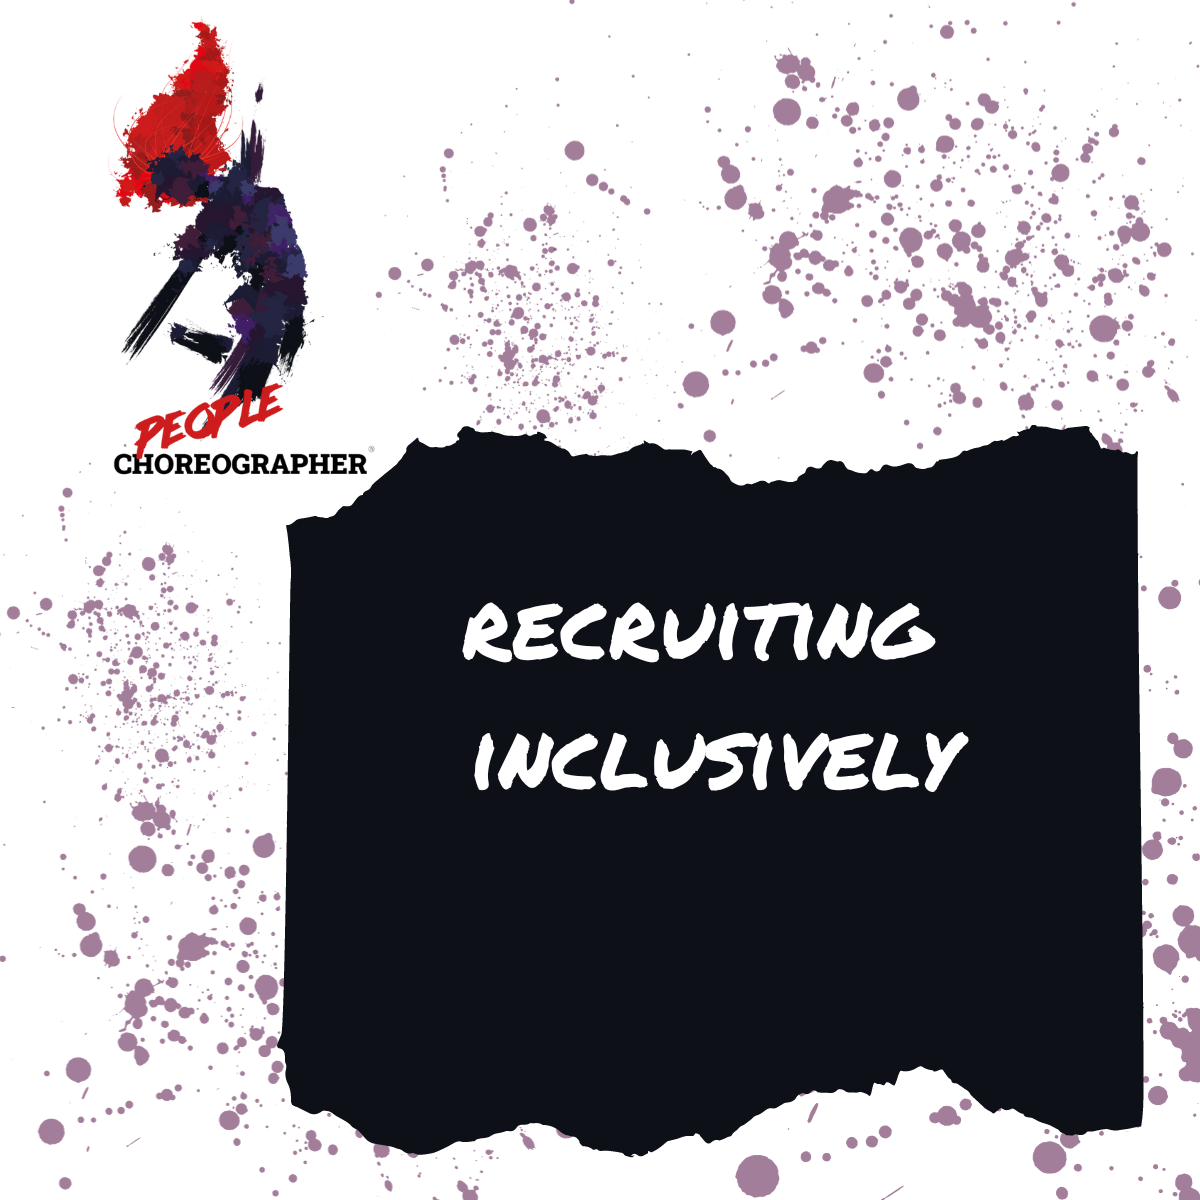 Recruiting Inclusively